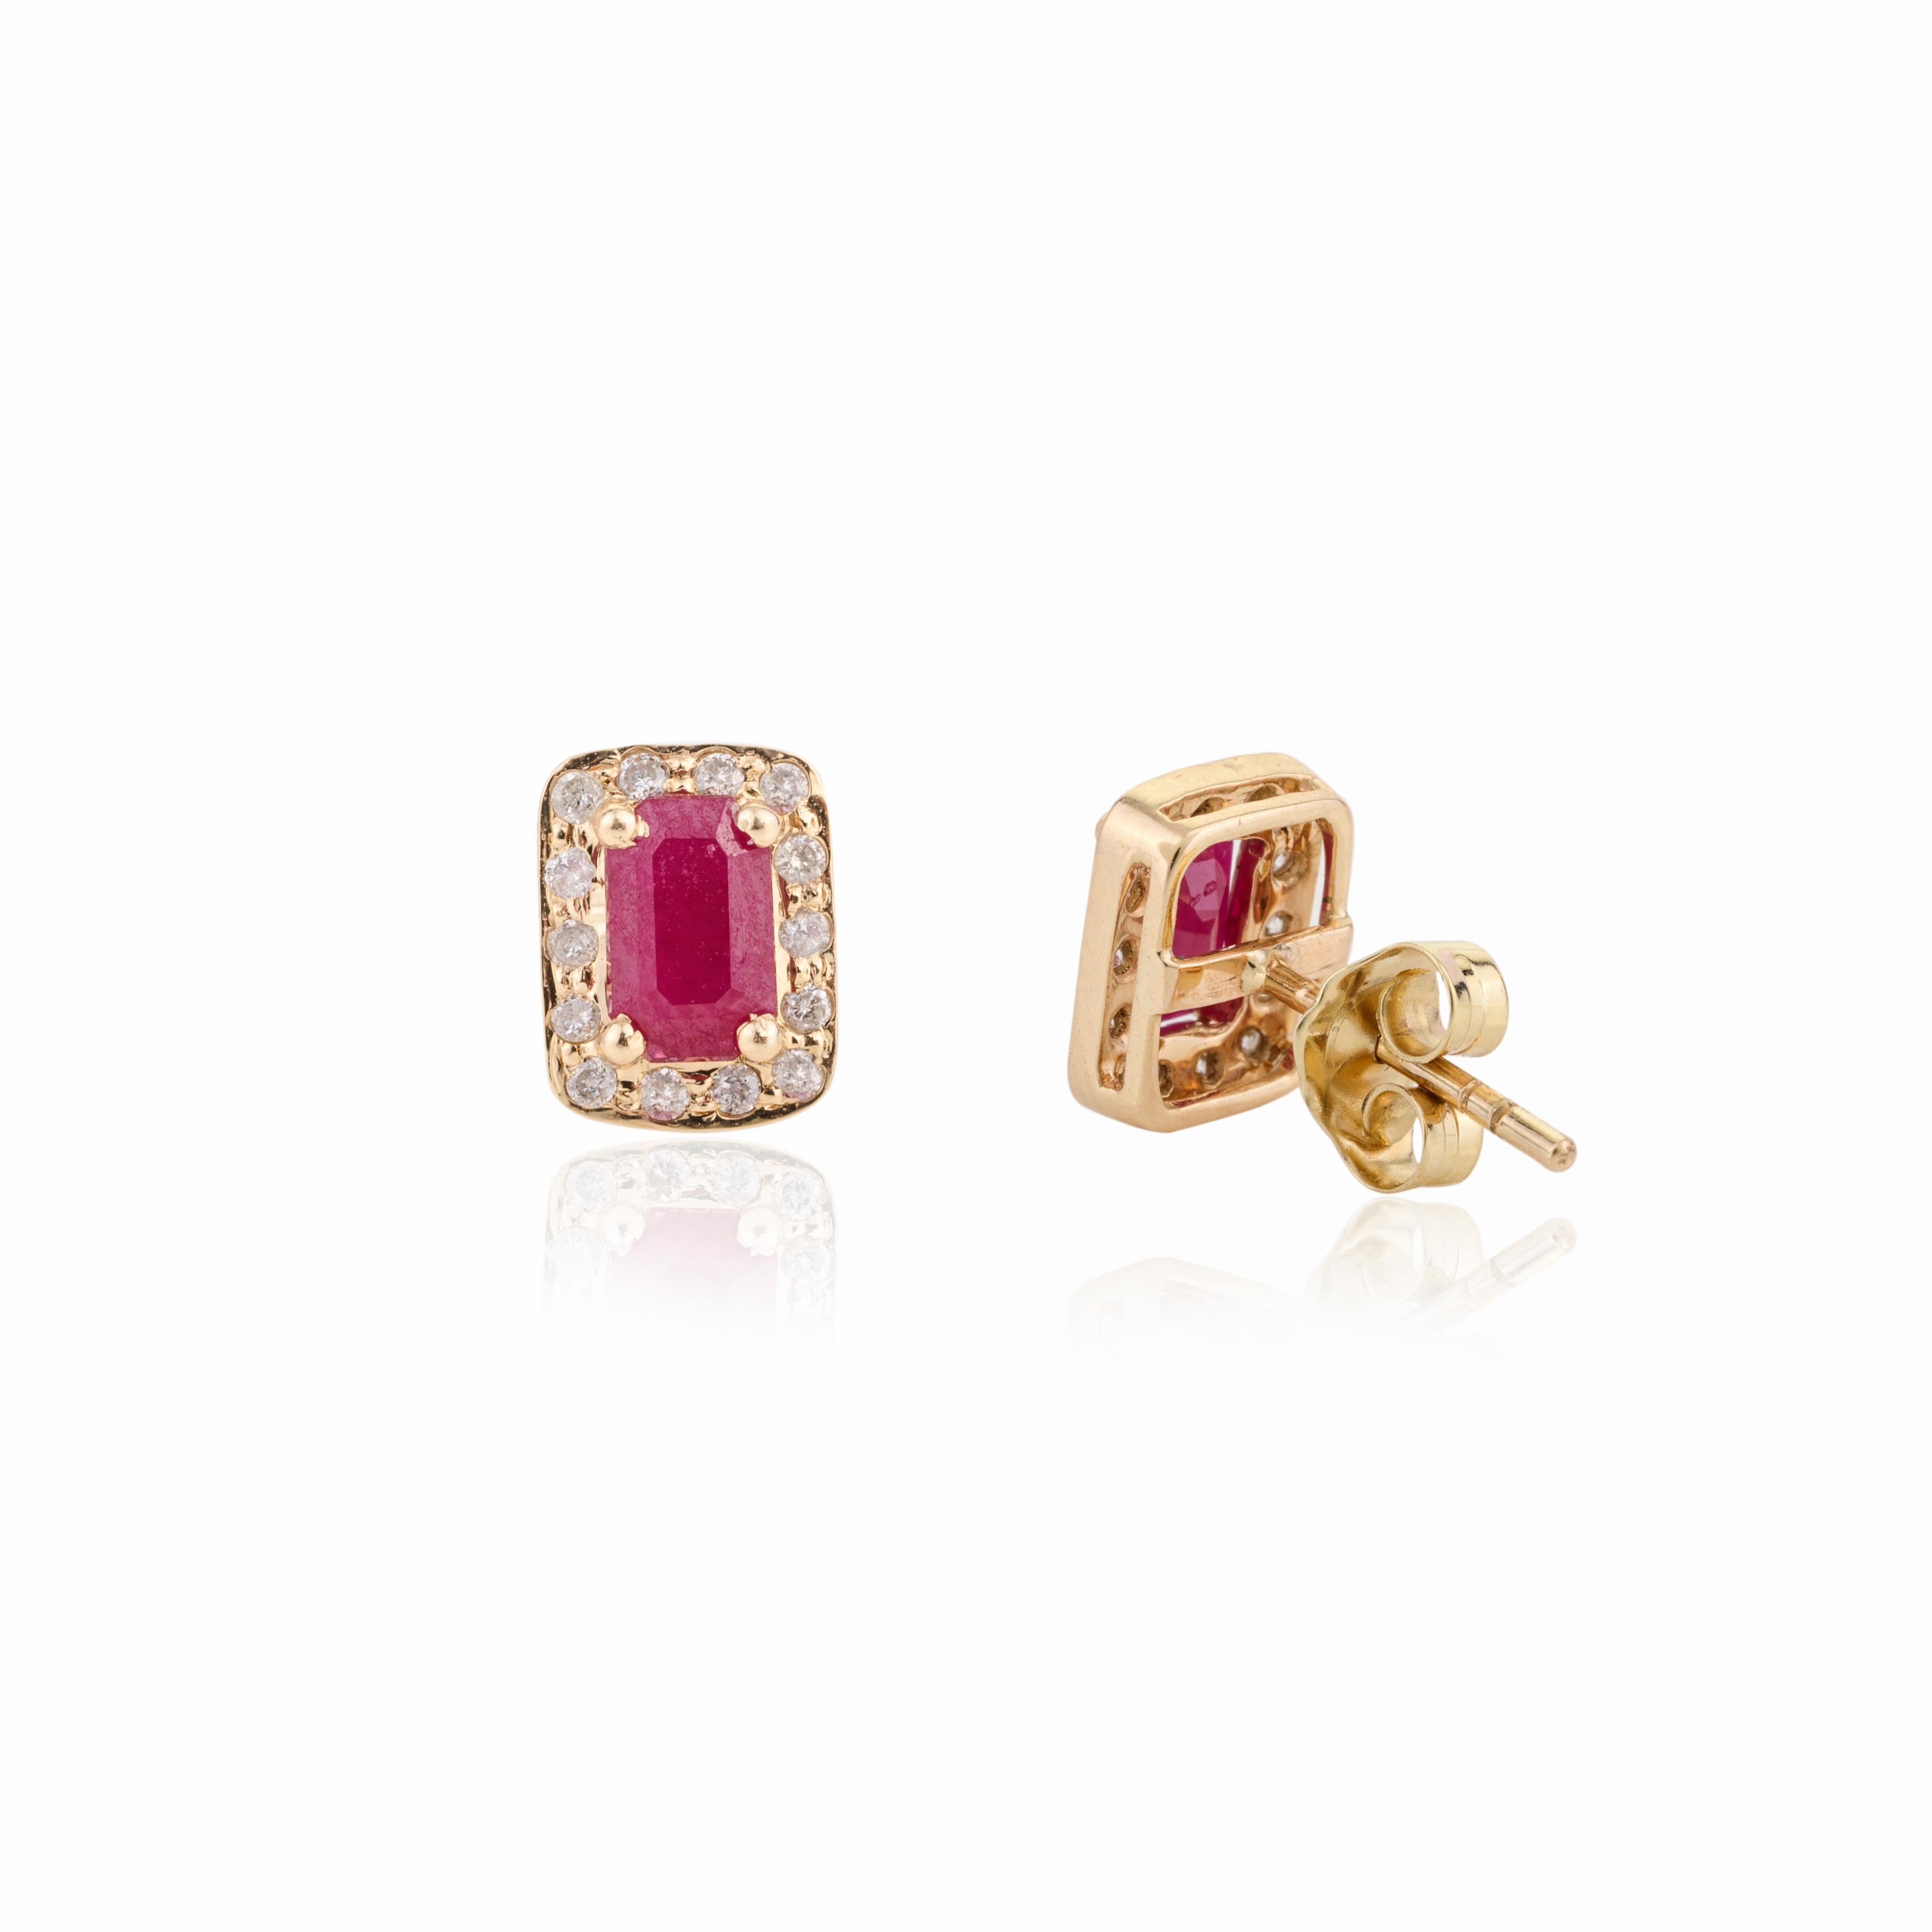 Women's 14k Gold Ruby Diamond Halo Stud Earrings Timeless Jewelry for Her For Sale